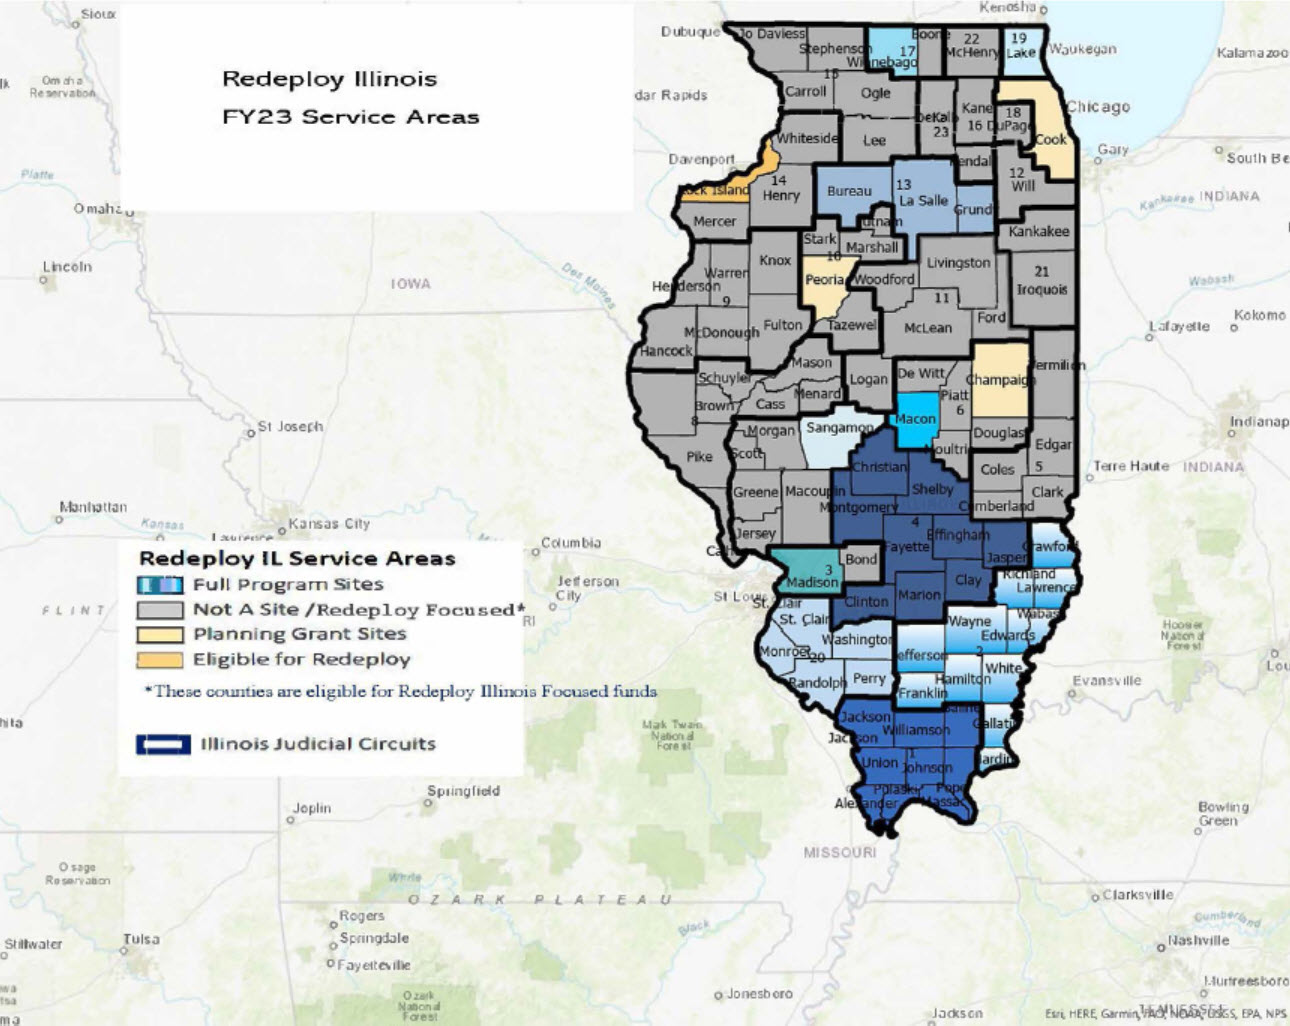 Redeploy Illinois FY23 service areas map of illinois